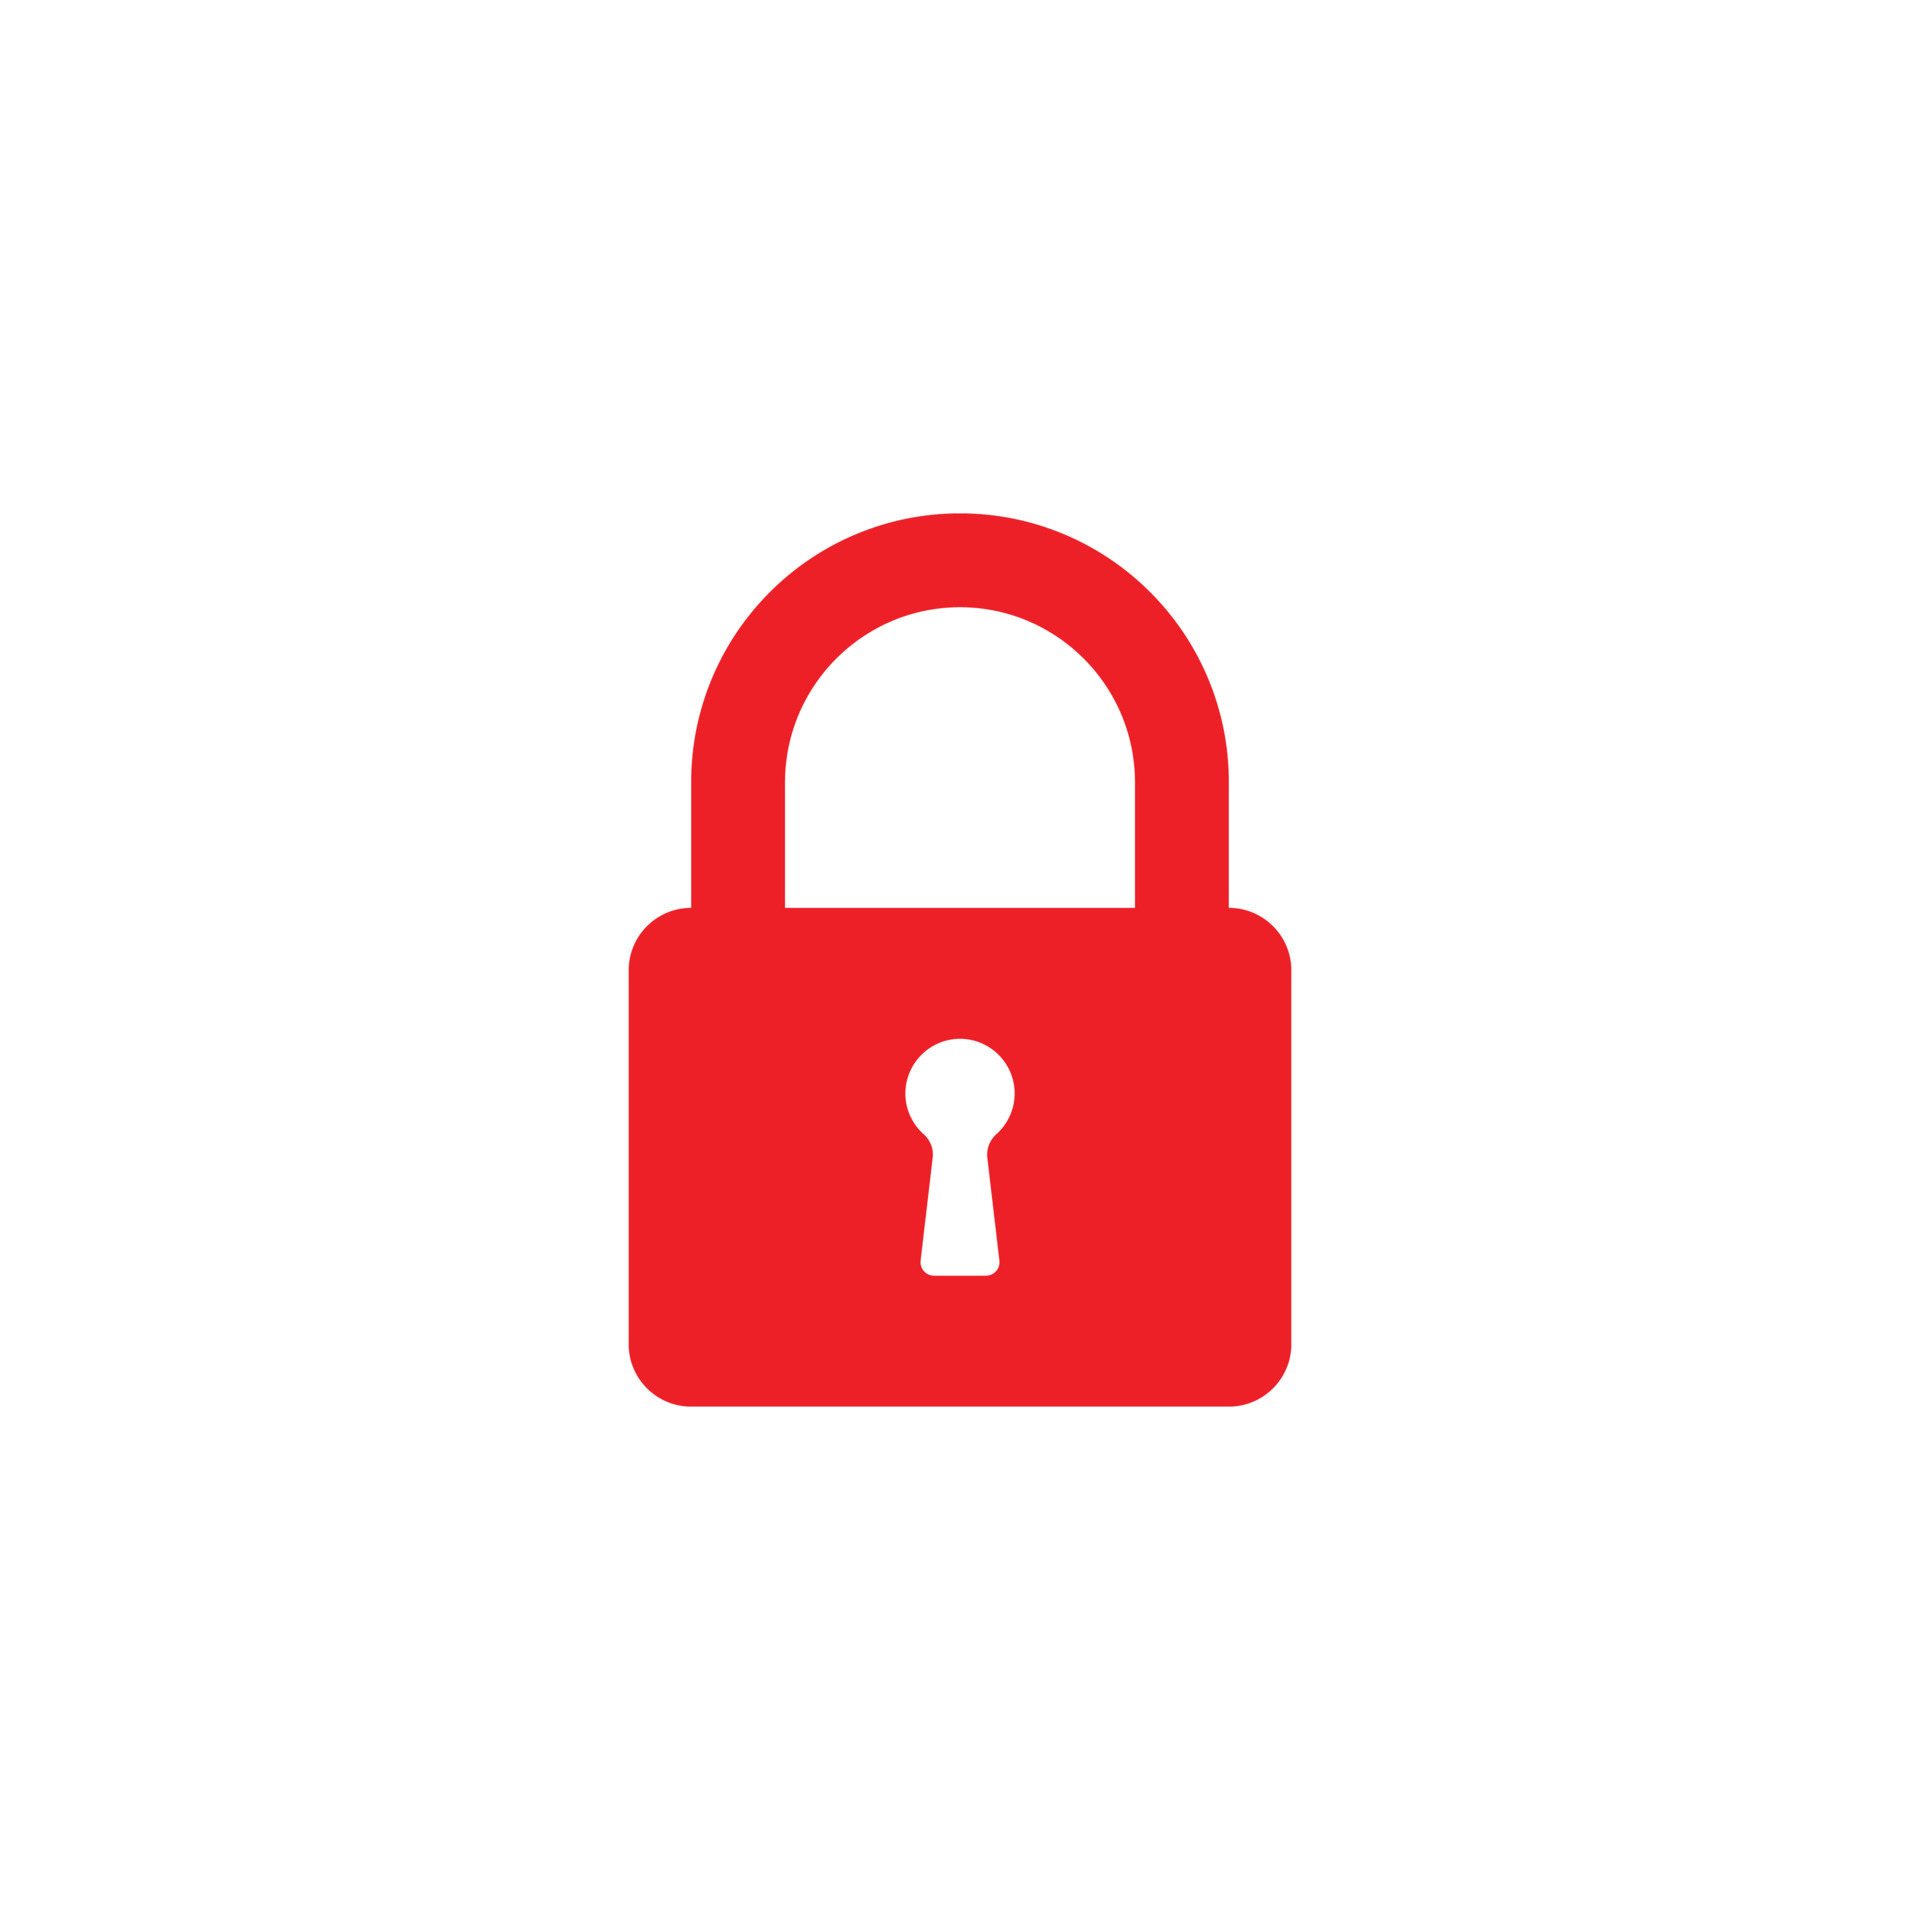 eps10 red vector security padlock art icon isolated on white background. closed lock in a simple flat trendy modern style for your website design, logo, and mobile application 12992232